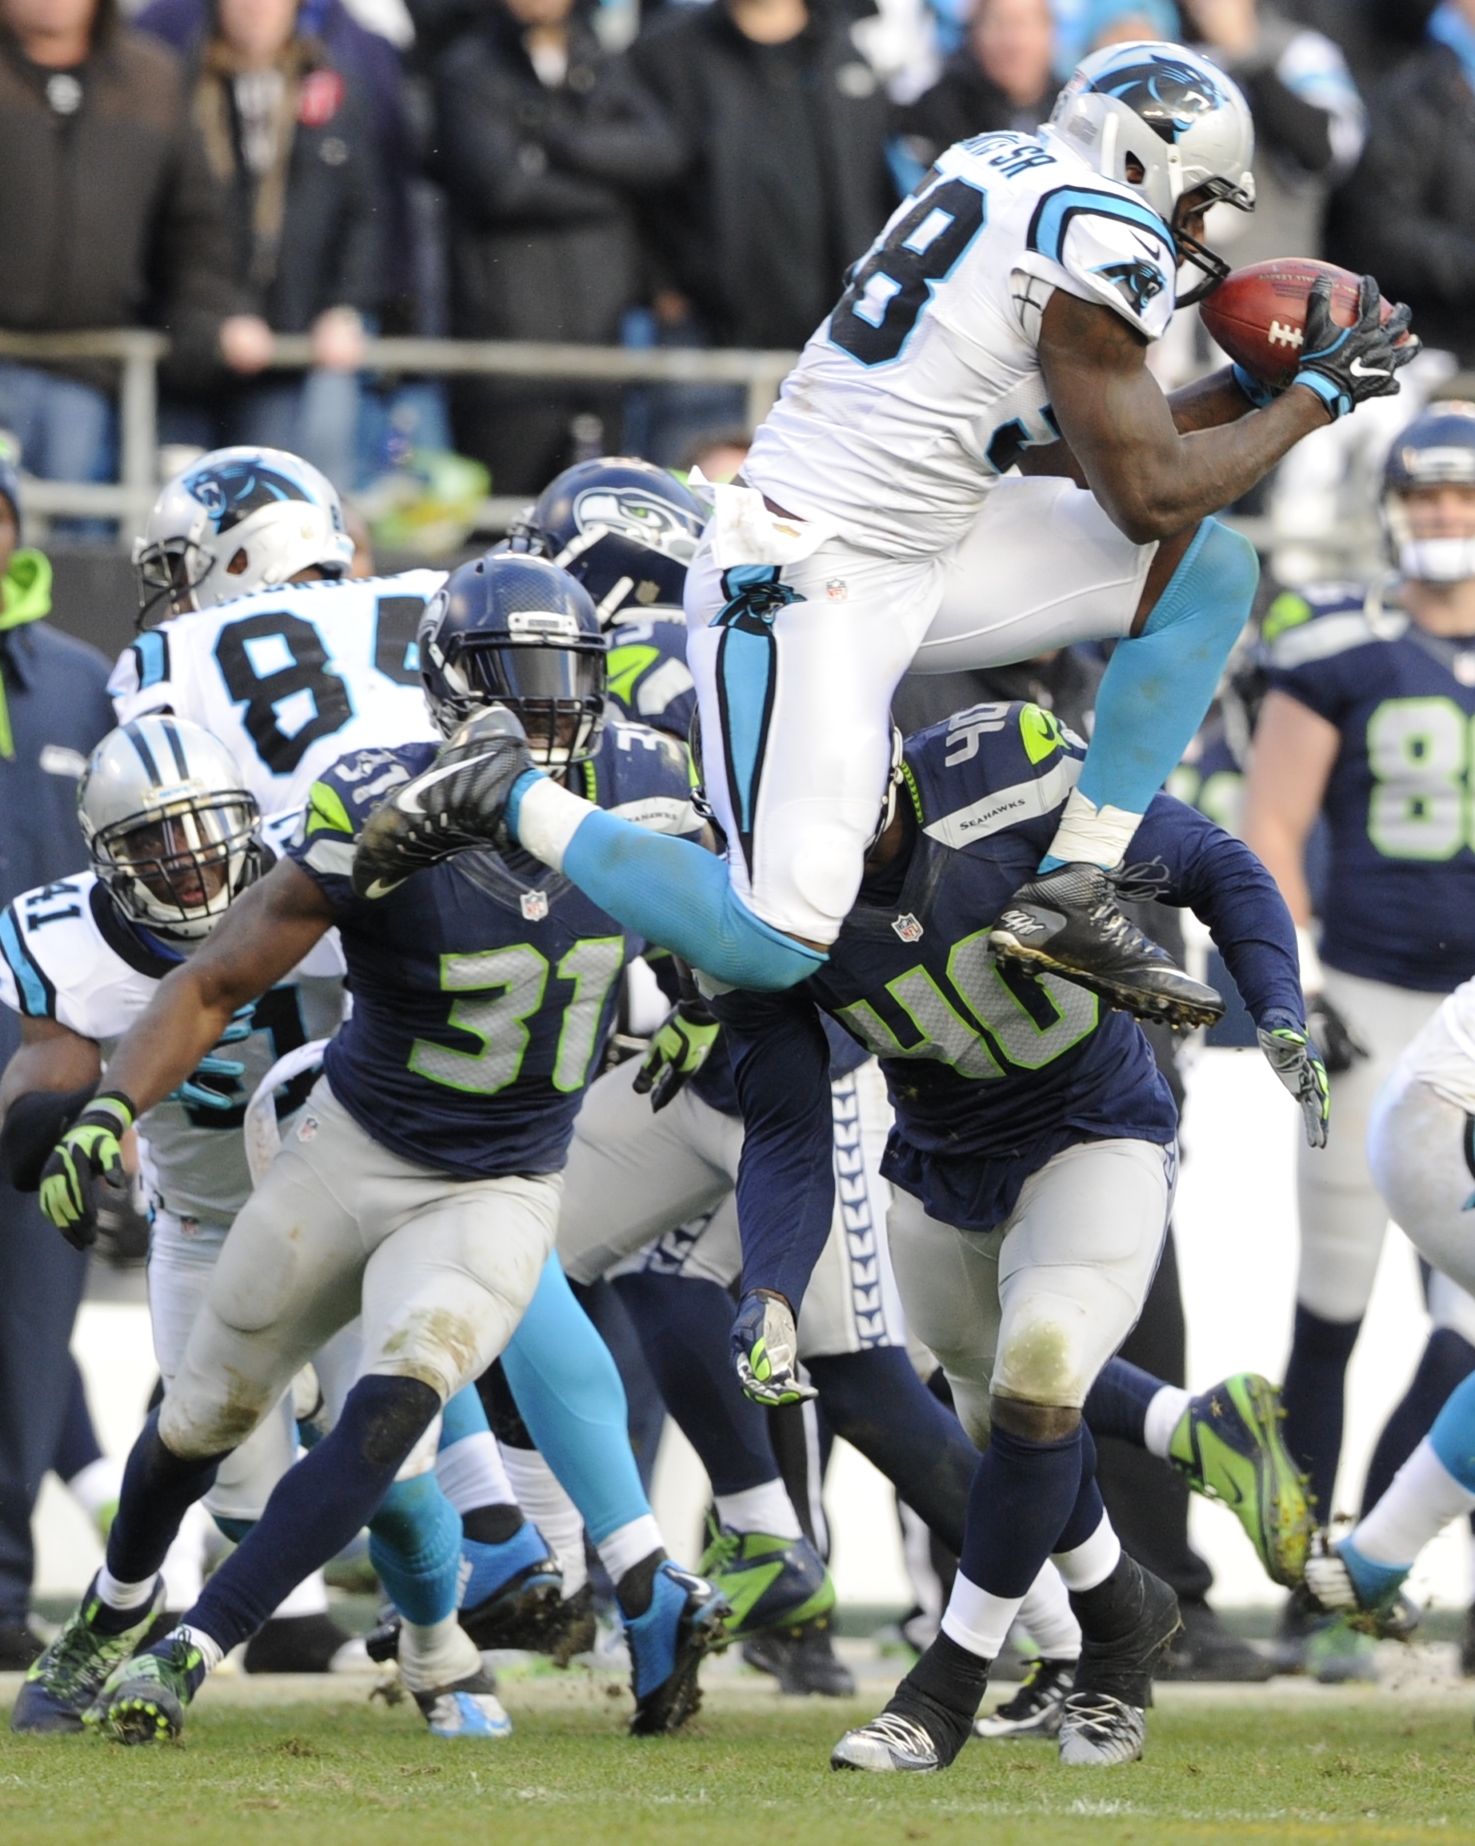 Carolina Panthers outside linebacker Thomas Davis (58) receives an on-side kick from the Seattle Seahawks during the second half of an NFL divisional playoff football game